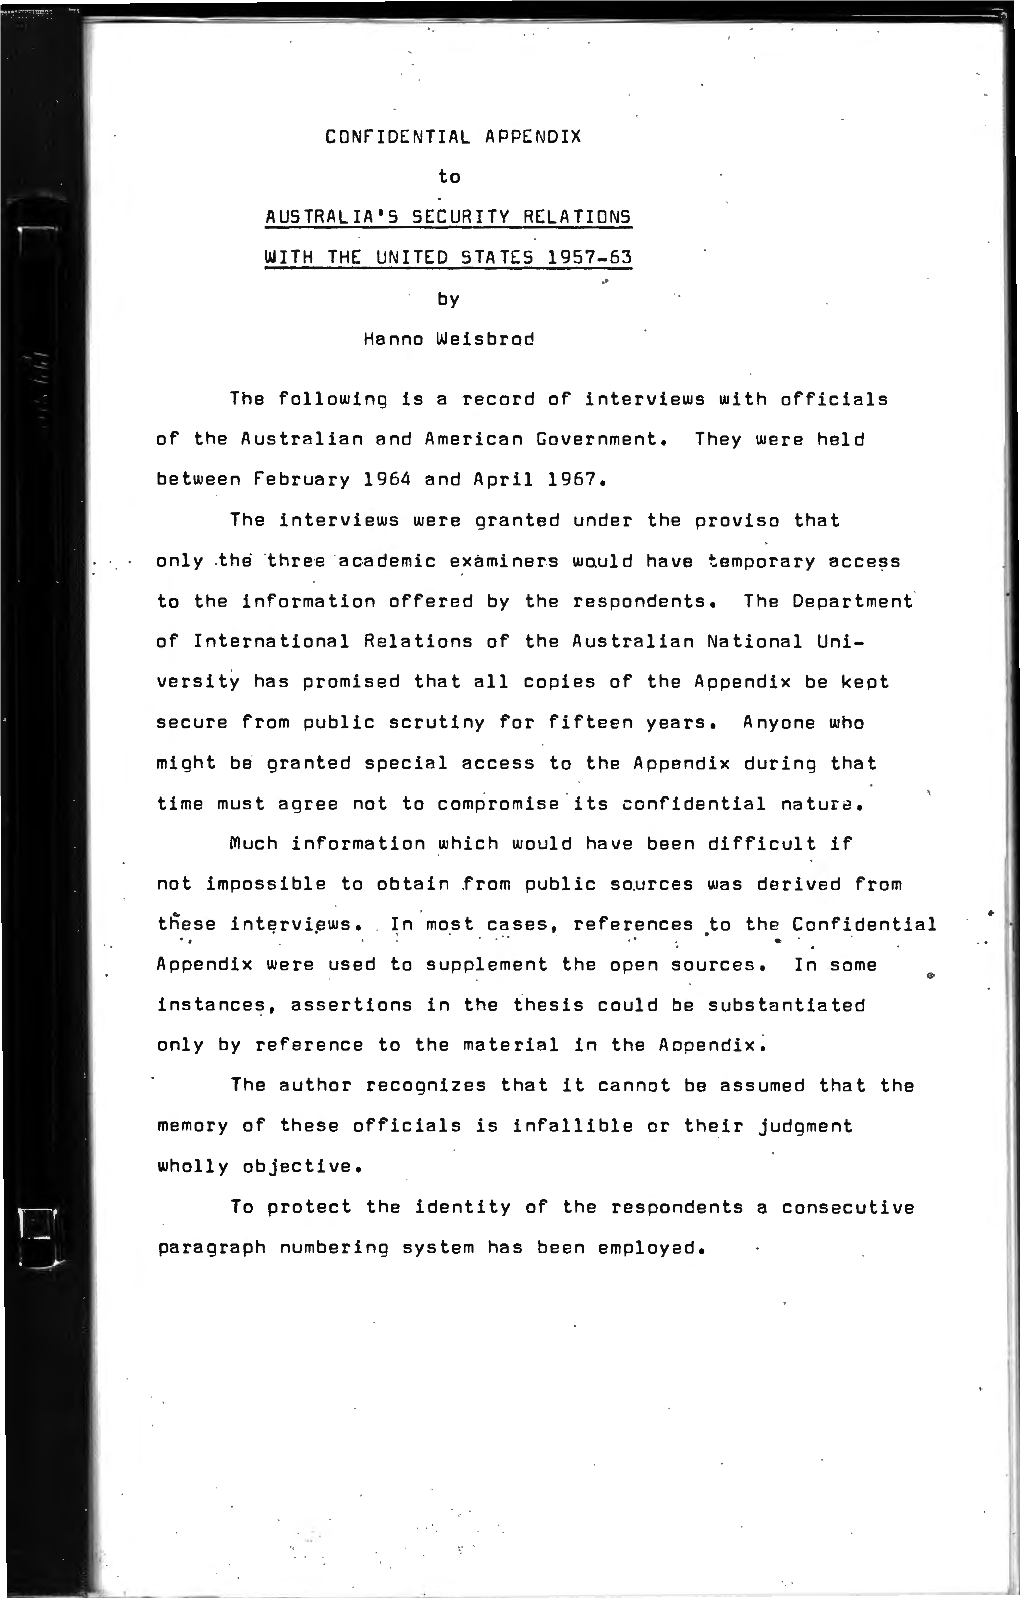 CONFIDENTIAL APPENDIX to AUSTRALIA's SECURITY RELATIONS with the UNITED STATES 1957-63